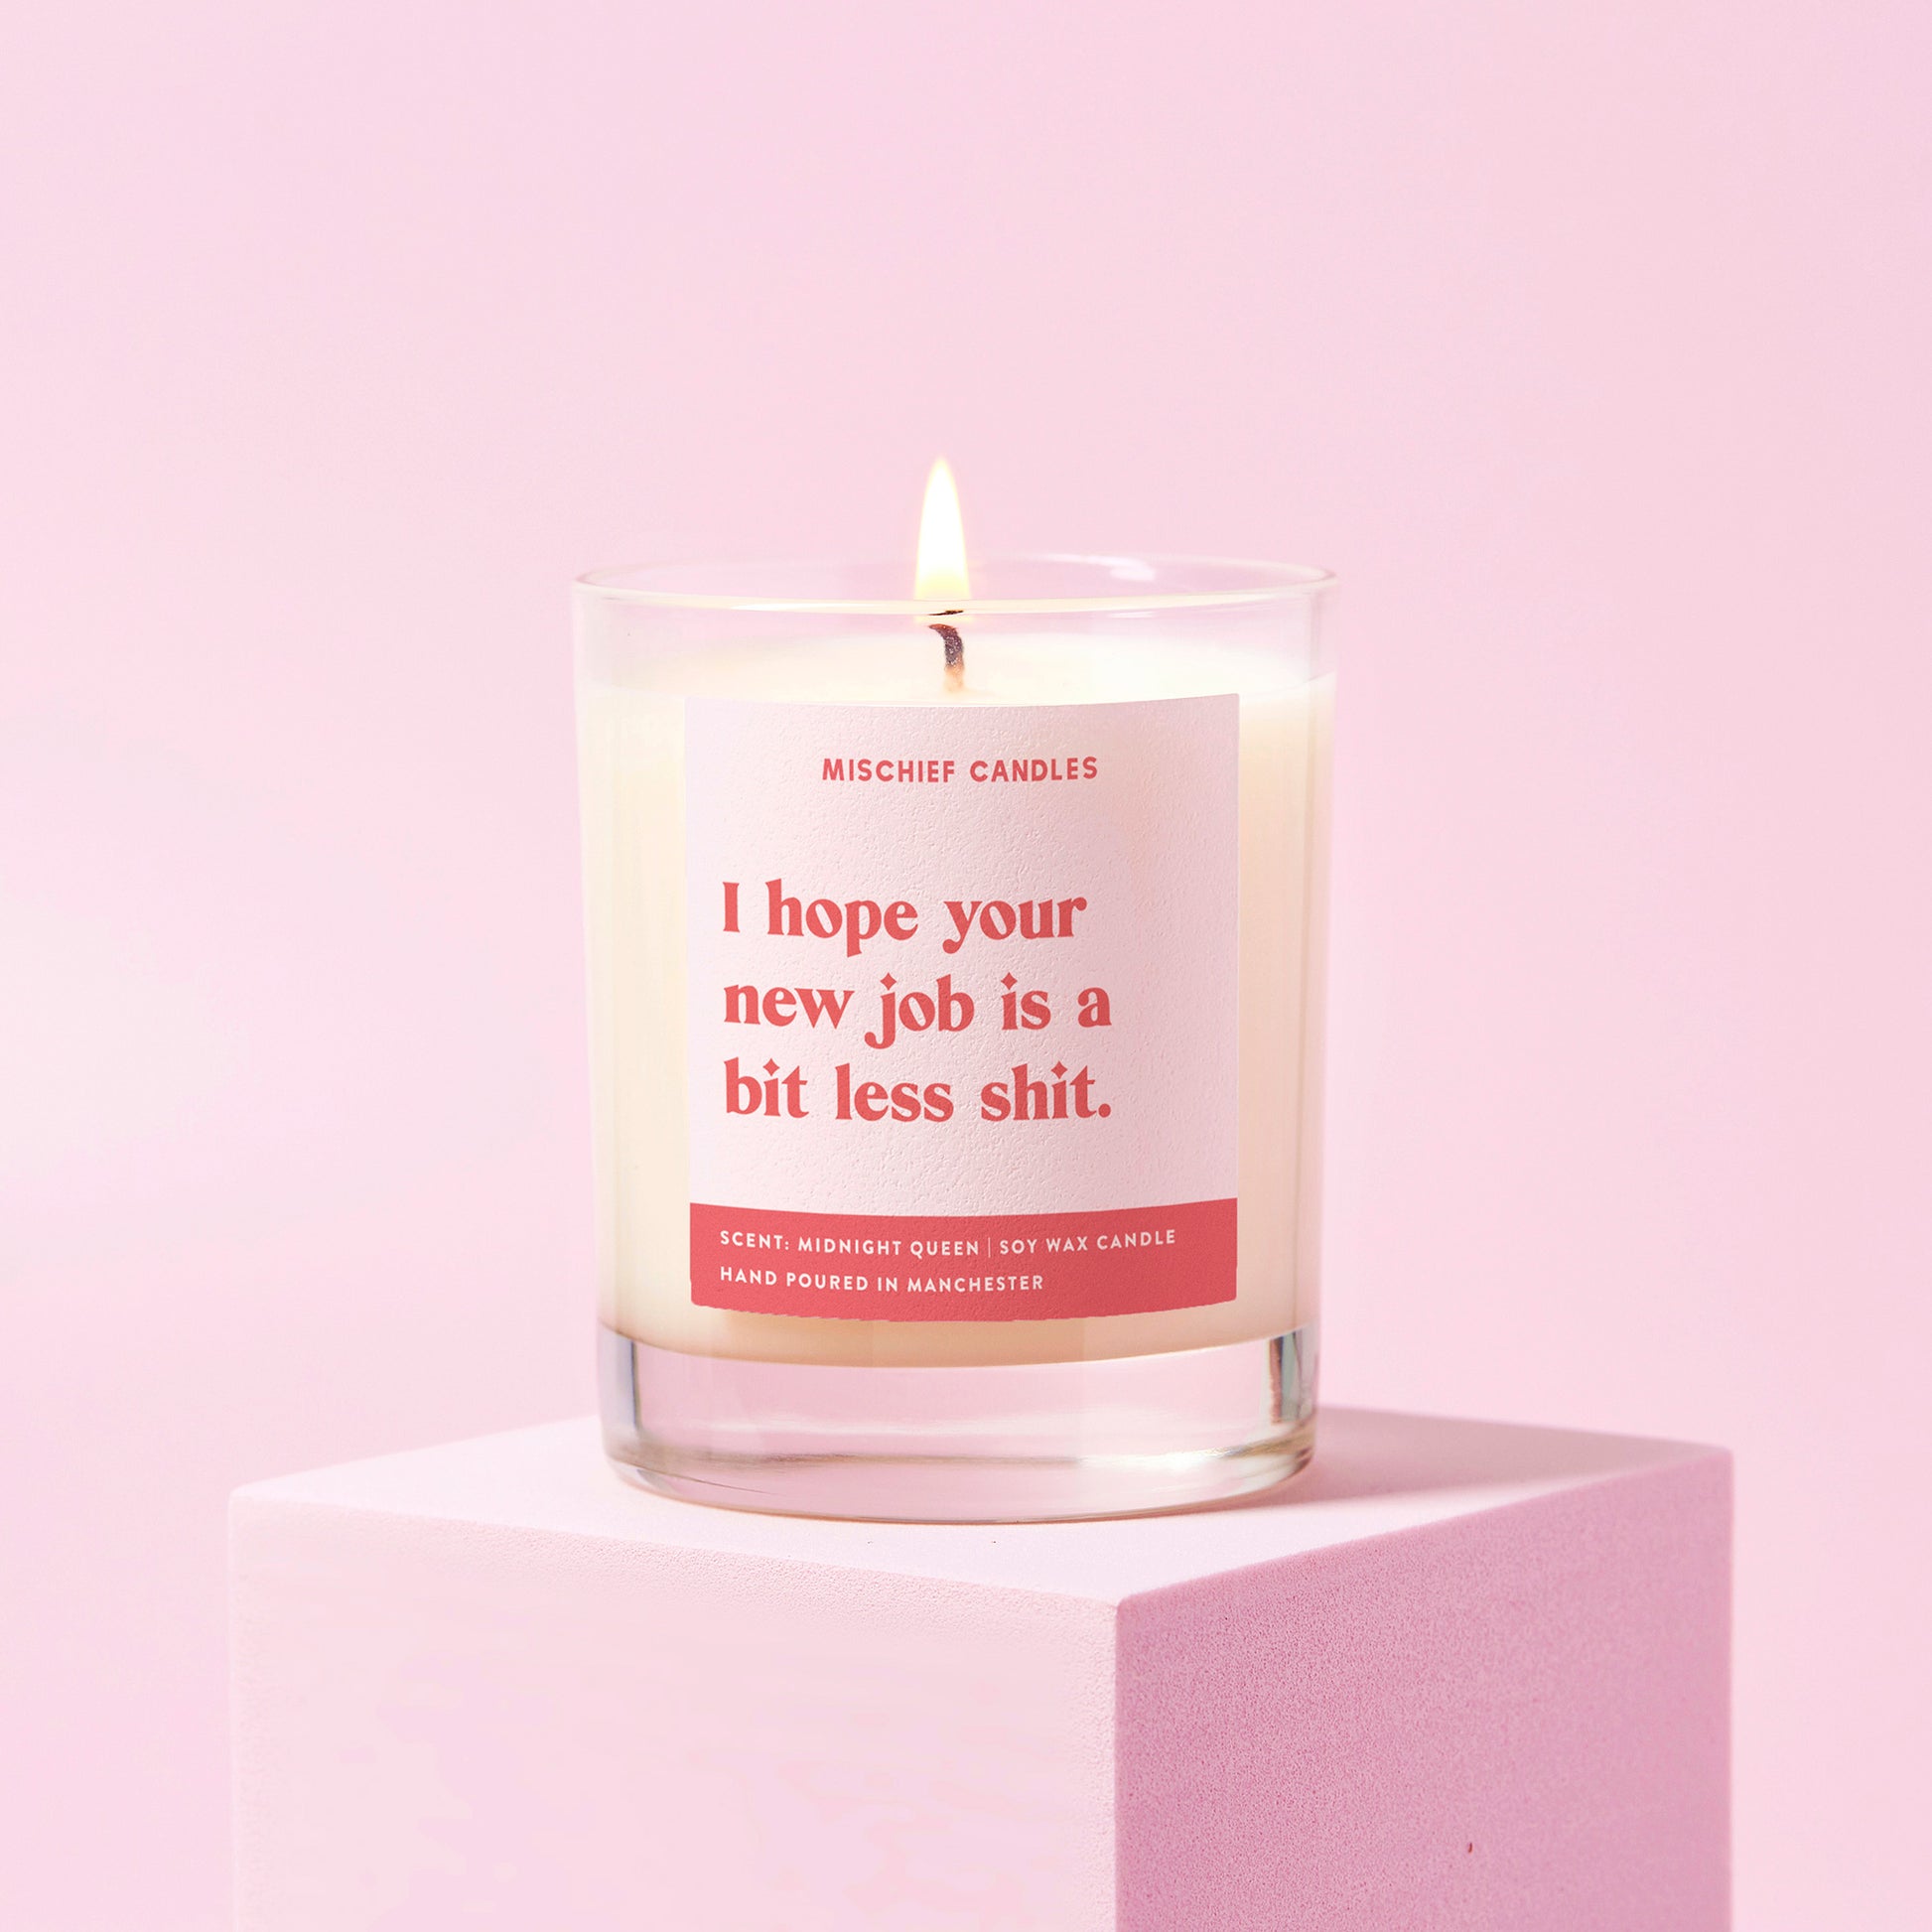 funny inspirational candle gift | candle gifts for self or friends or  co-workers breathe in the candle blow out the bullshit | soy wax candle